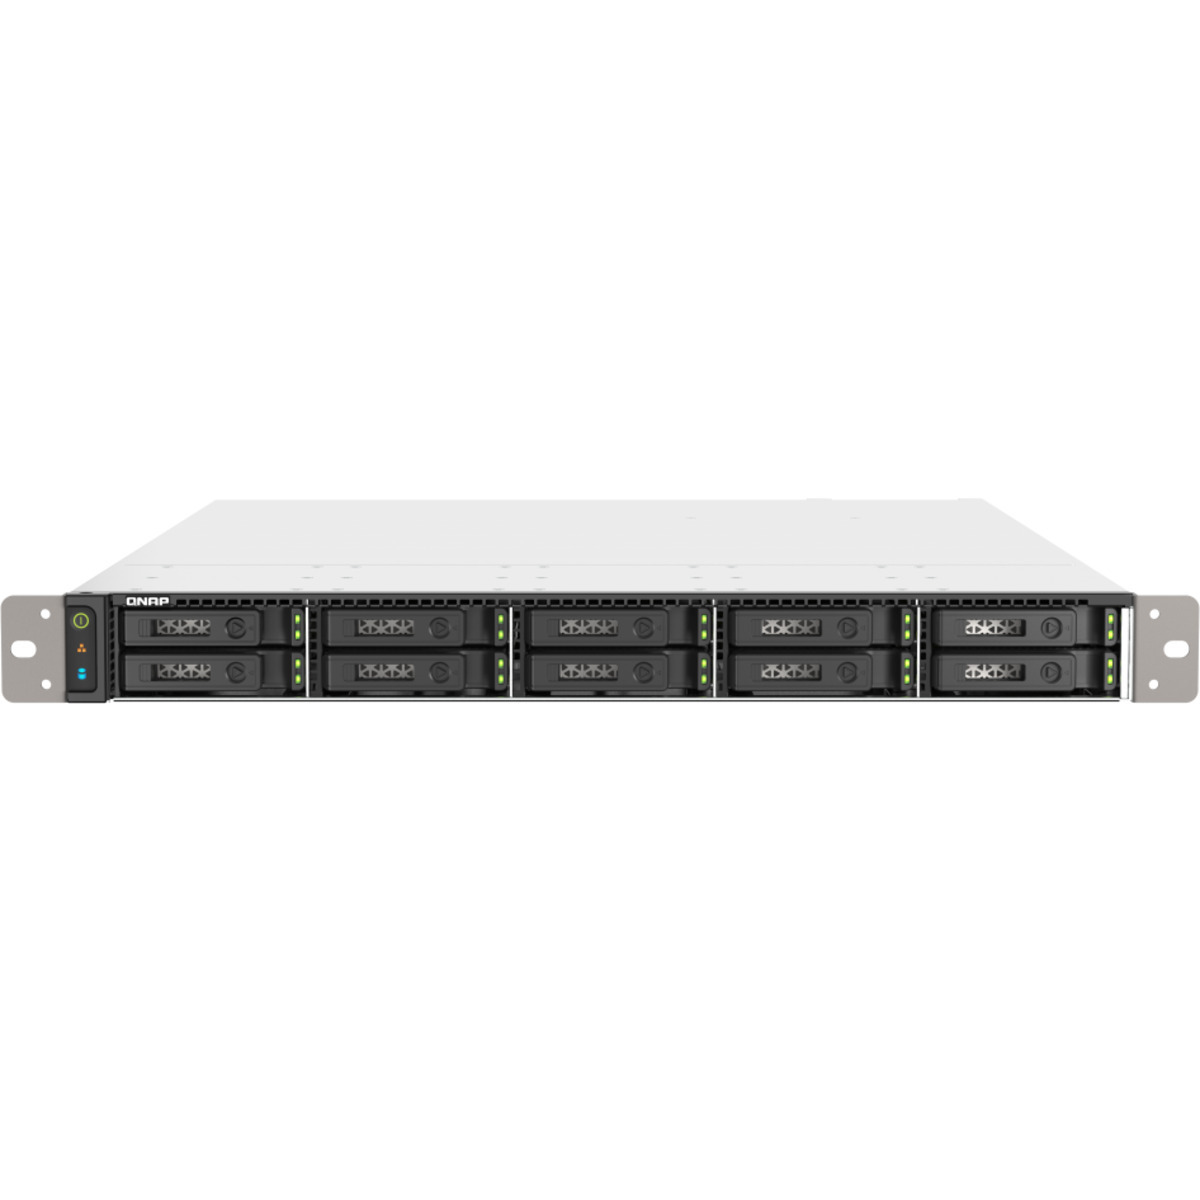 QNAP TS-h1090FU-7232P 12tb 10-Bay RackMount Large Business / Enterprise NAS - Network Attached Storage Device 6x2tb Sabrent Rocket 4 Plus SB-RKT4P-2TB  7000/6850MB/s M.2 2280 NVMe SSD CONSUMER Class Drives Installed - Burn-In Tested TS-h1090FU-7232P